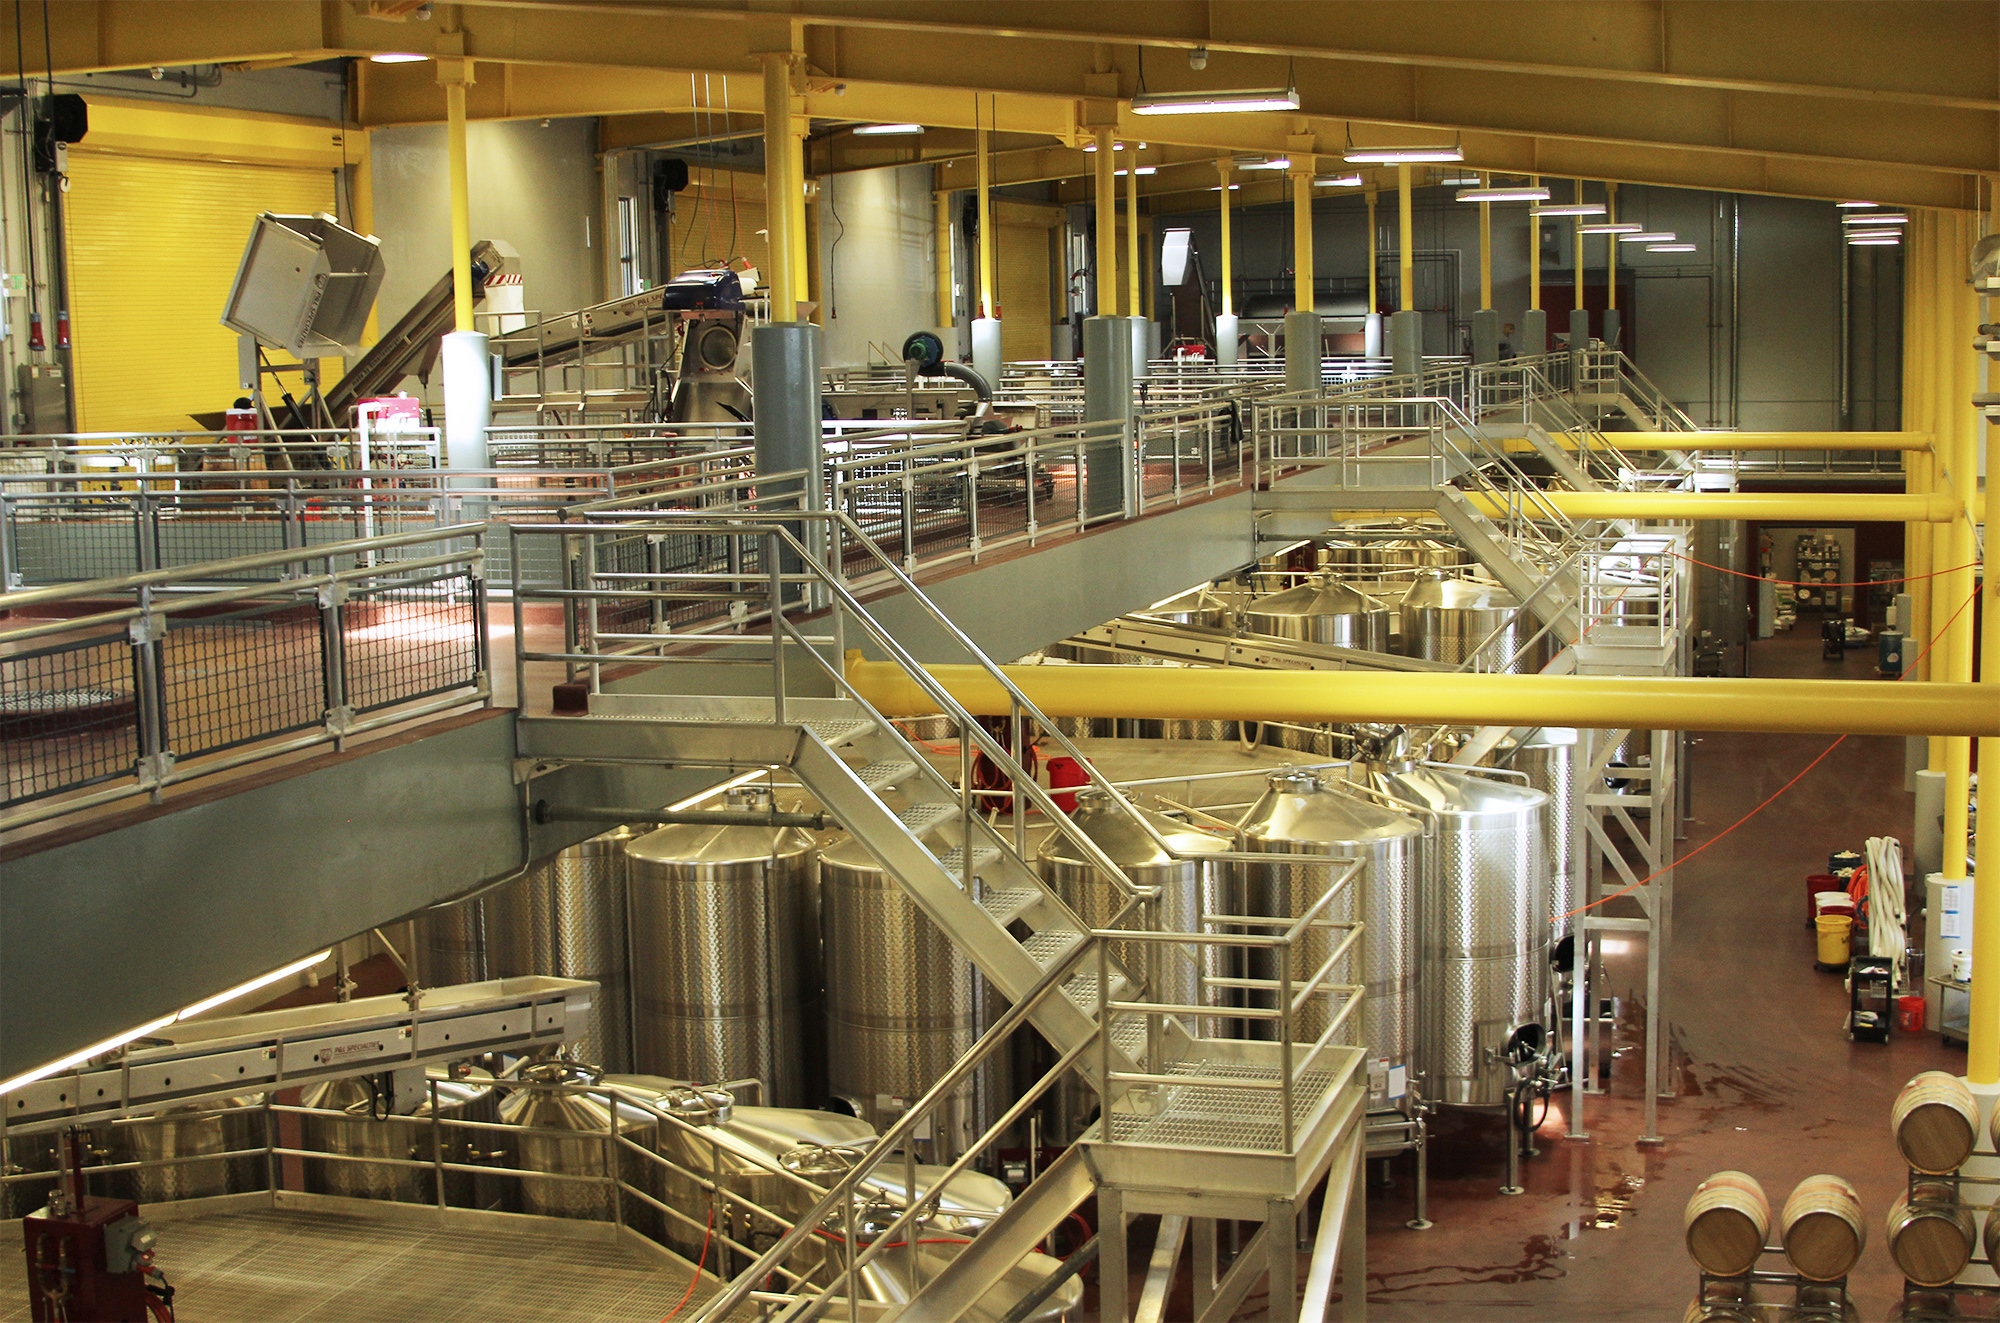 A shot of a winery, with stainless steel equipment and bright yellow support beams.